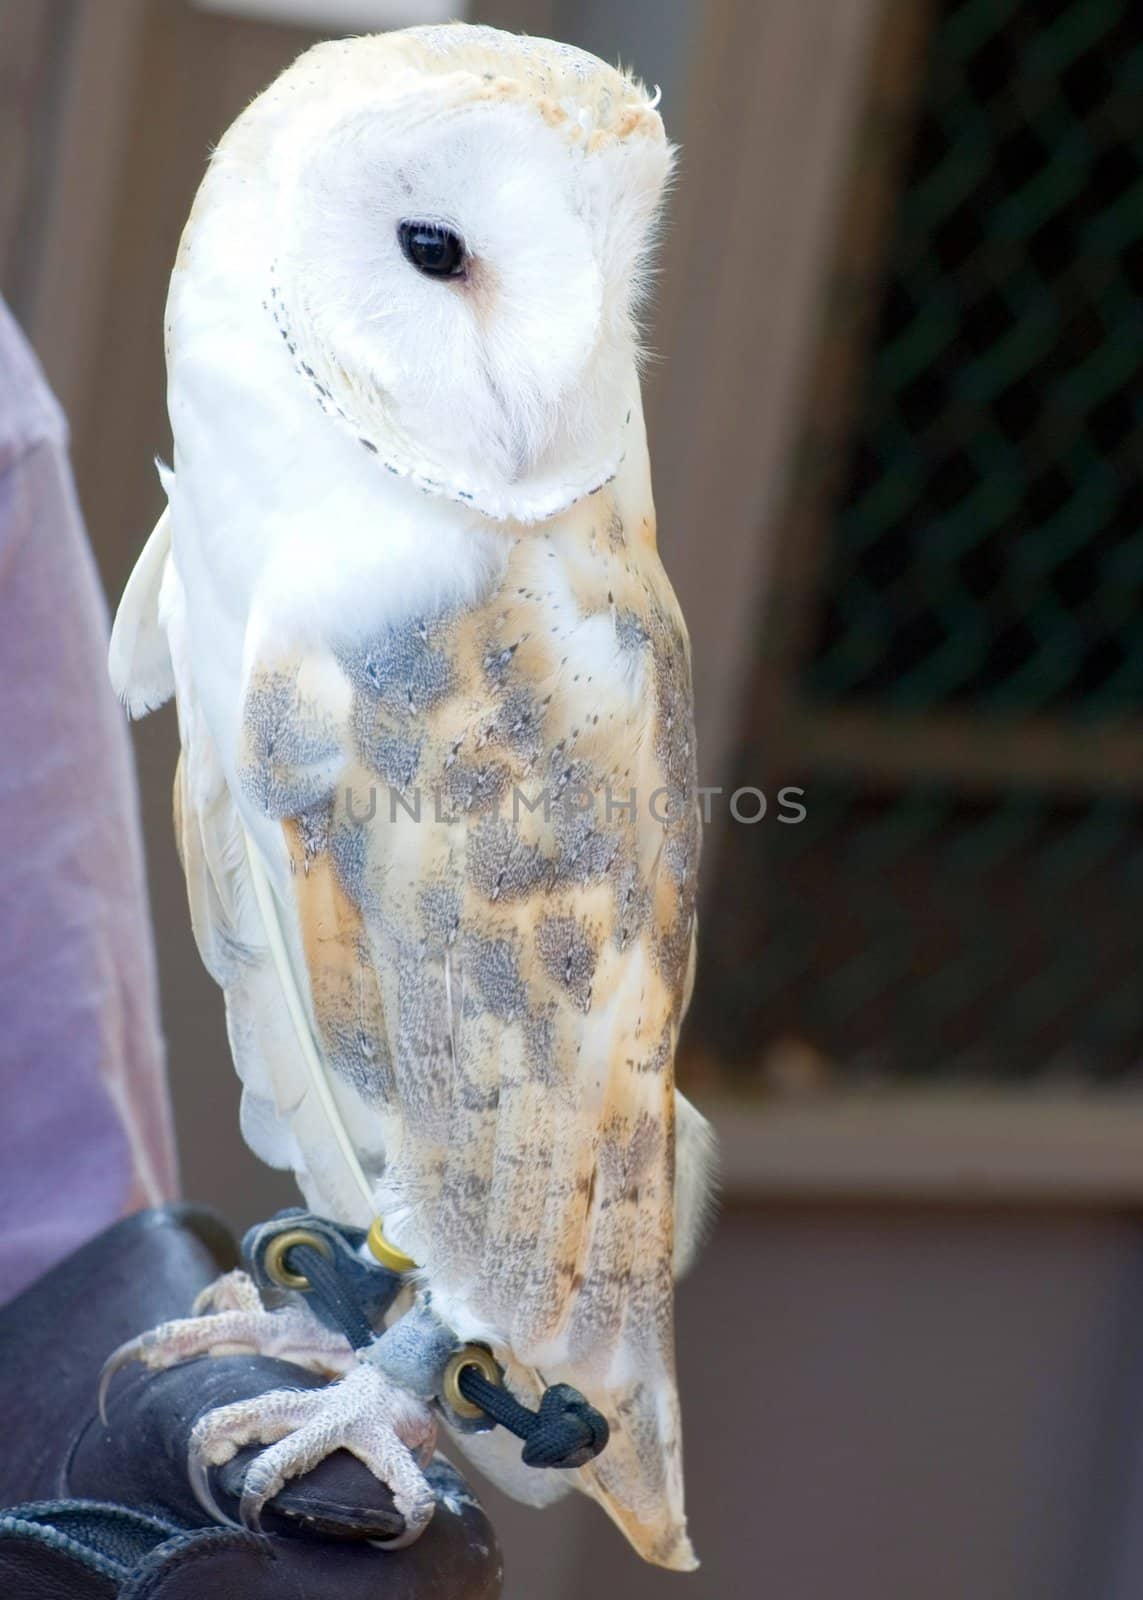 A captive European barn owl tethered and perched on an arm.